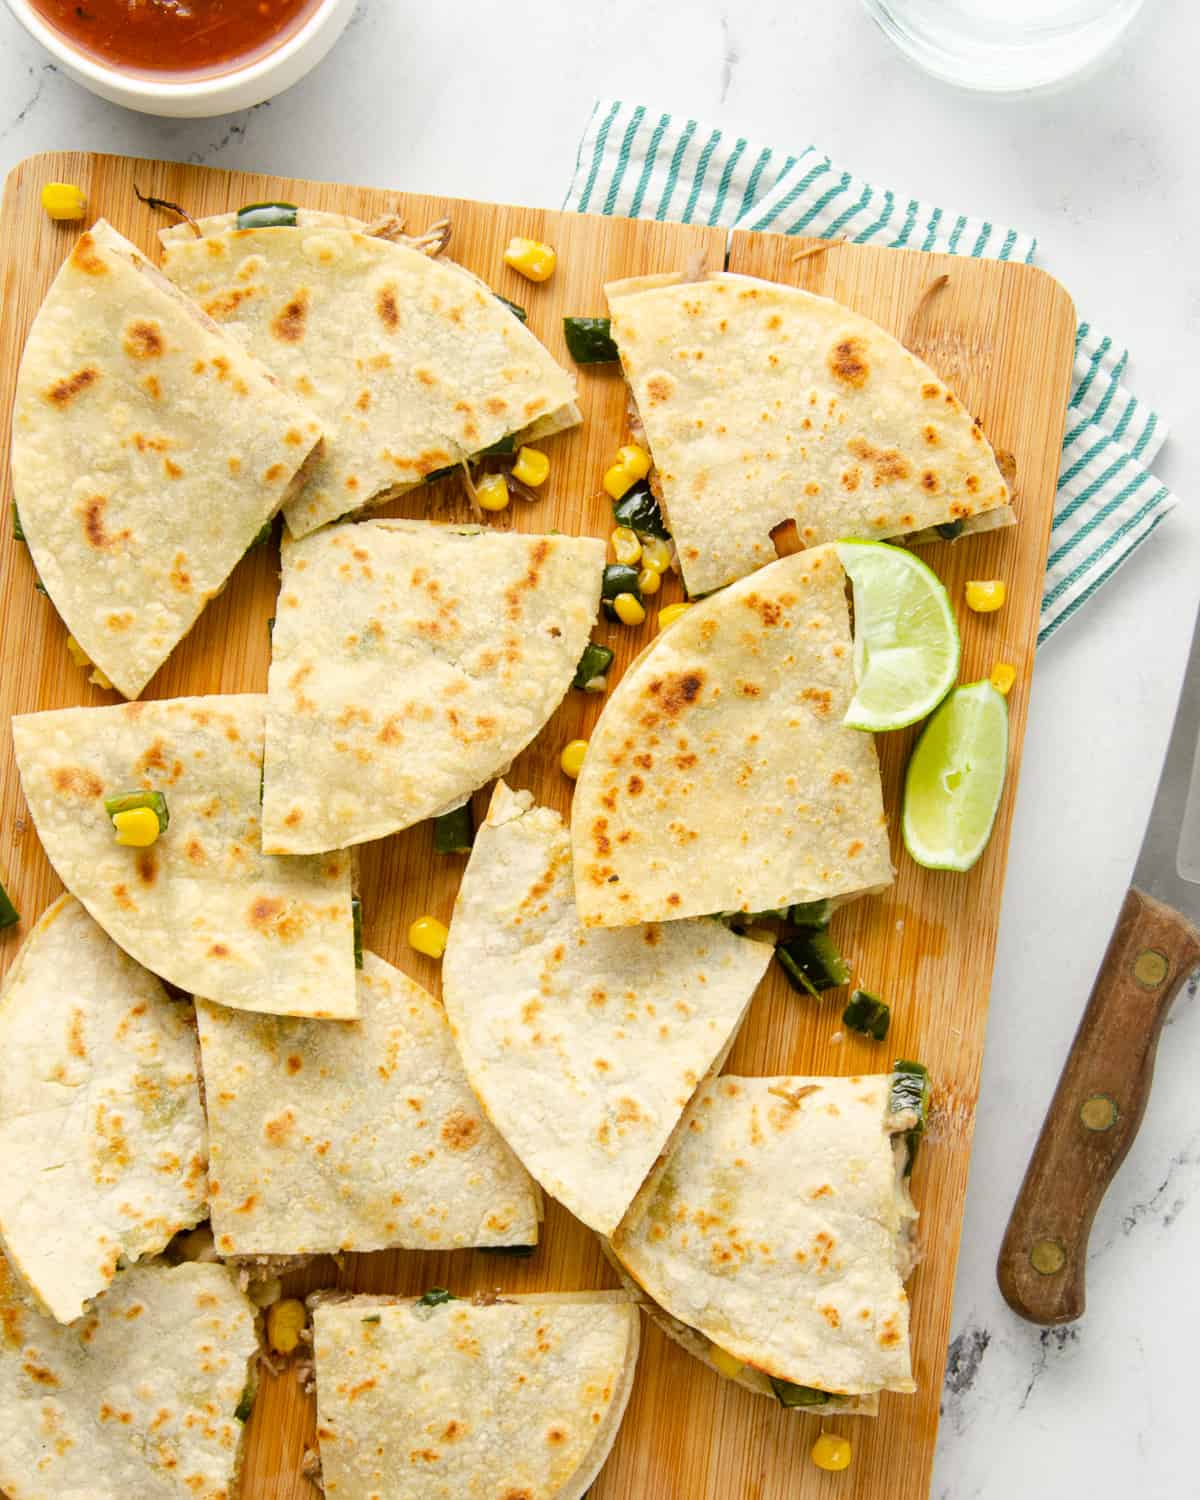 A cutting board topped with carnitas quesadillas cut into quarters.